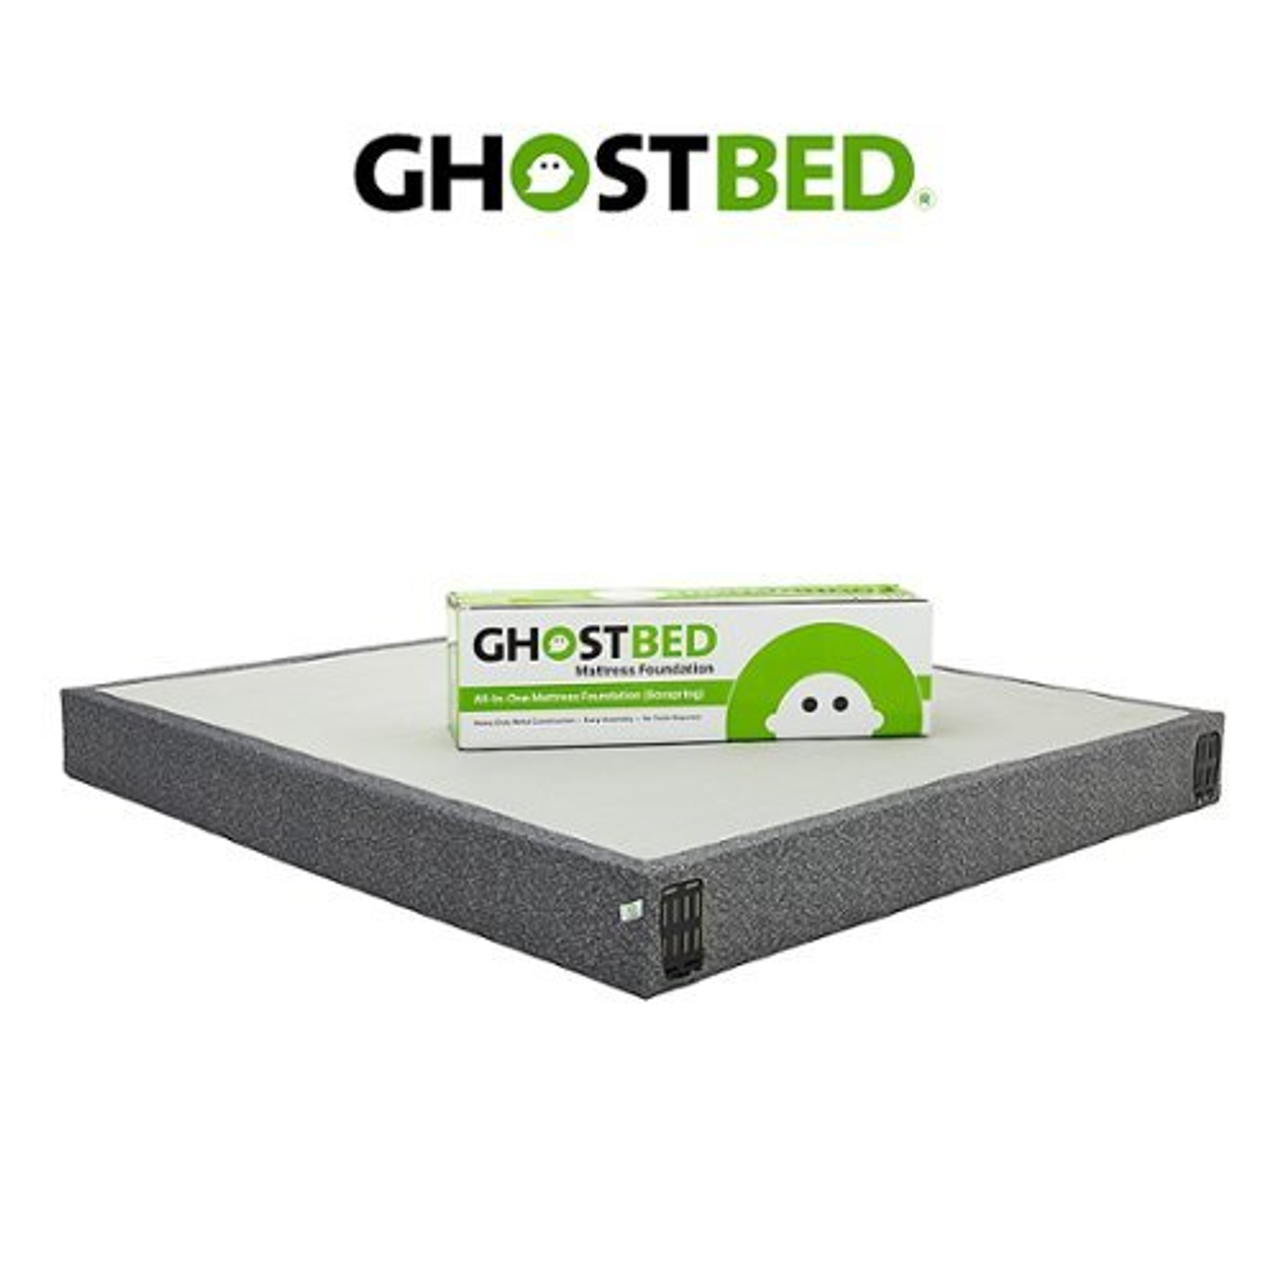 Ghostbed - All-in-One Box Spring & Foundation - Queen